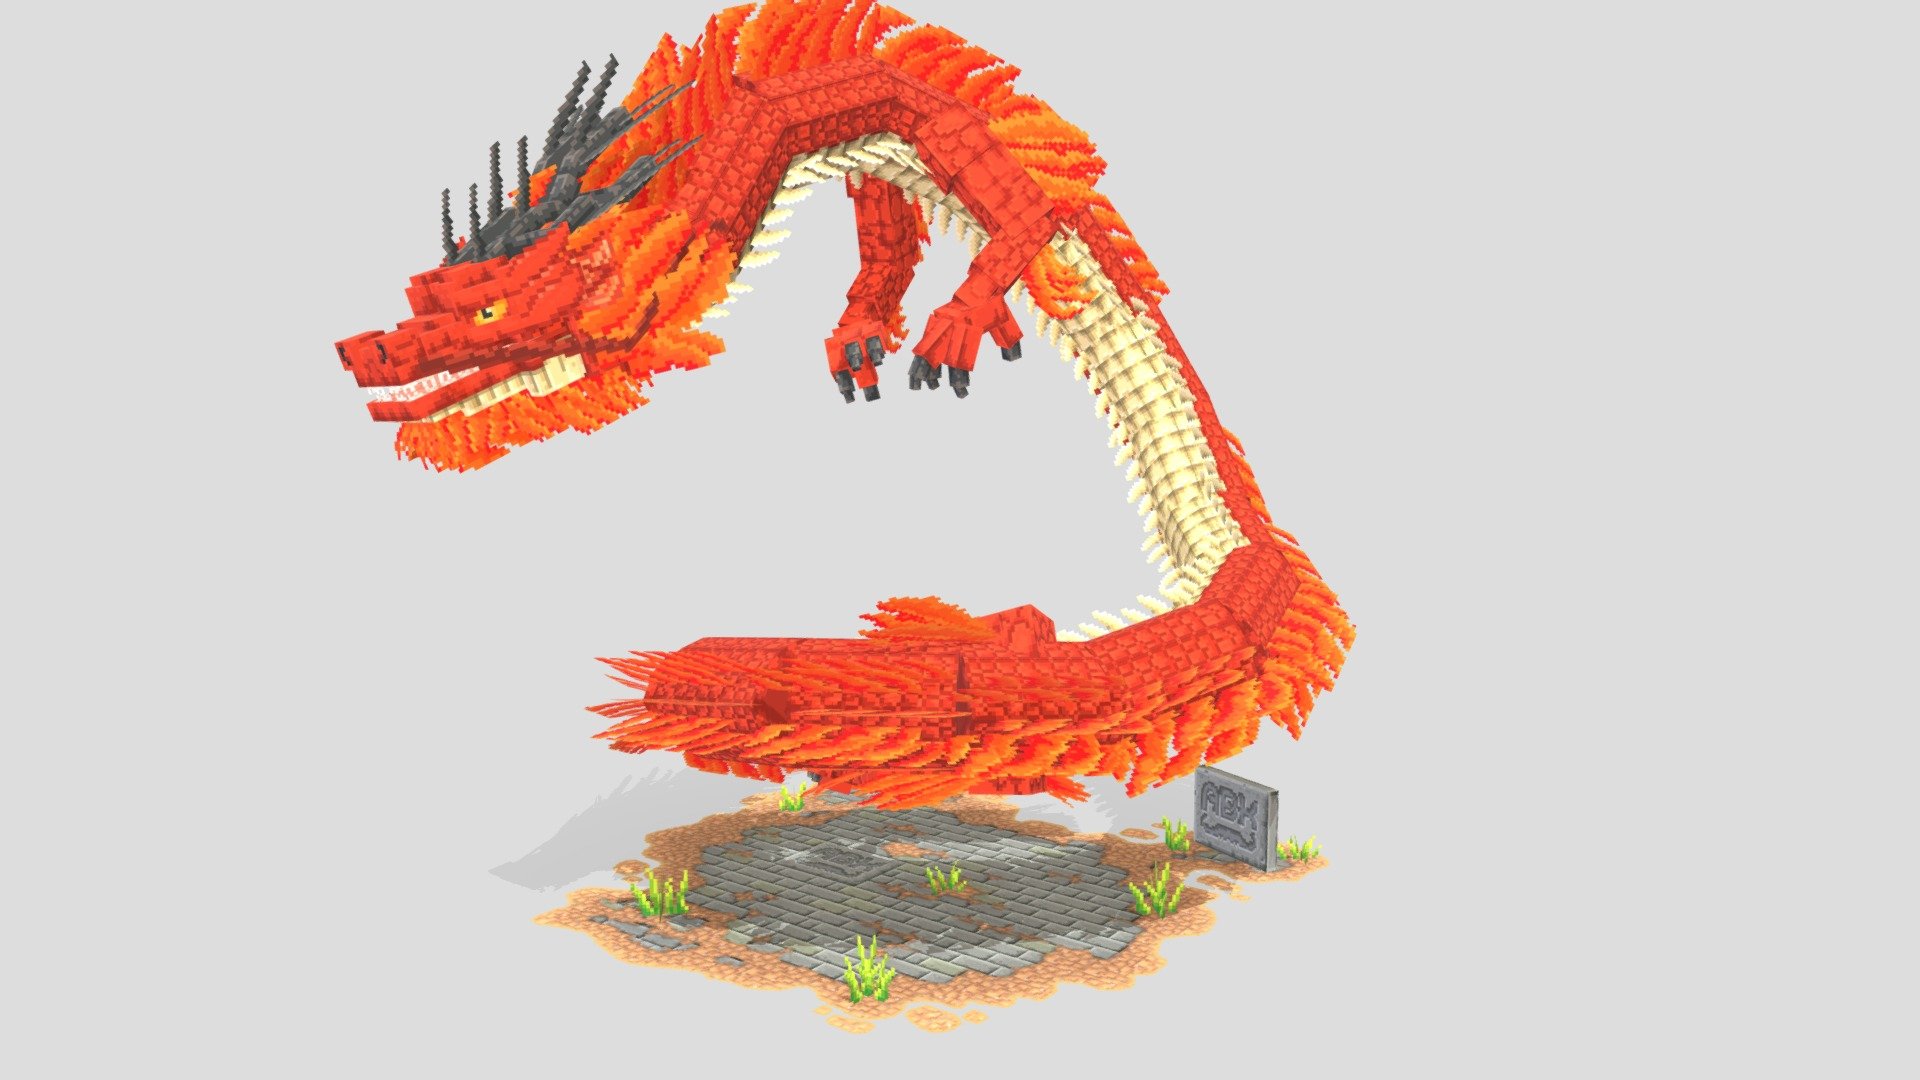 The Red Wind Serpent soars the skies, defending good from evil.
Comes as a blockbench model with a plethora of animations.

For more custom assets visit https://artsbykev.net/webstore

For inspiration: https://youtube.com/artsbykev - Red Wind Serpent - Blockbench Model - Buy Royalty Free 3D model by ArtsByKev 3d model